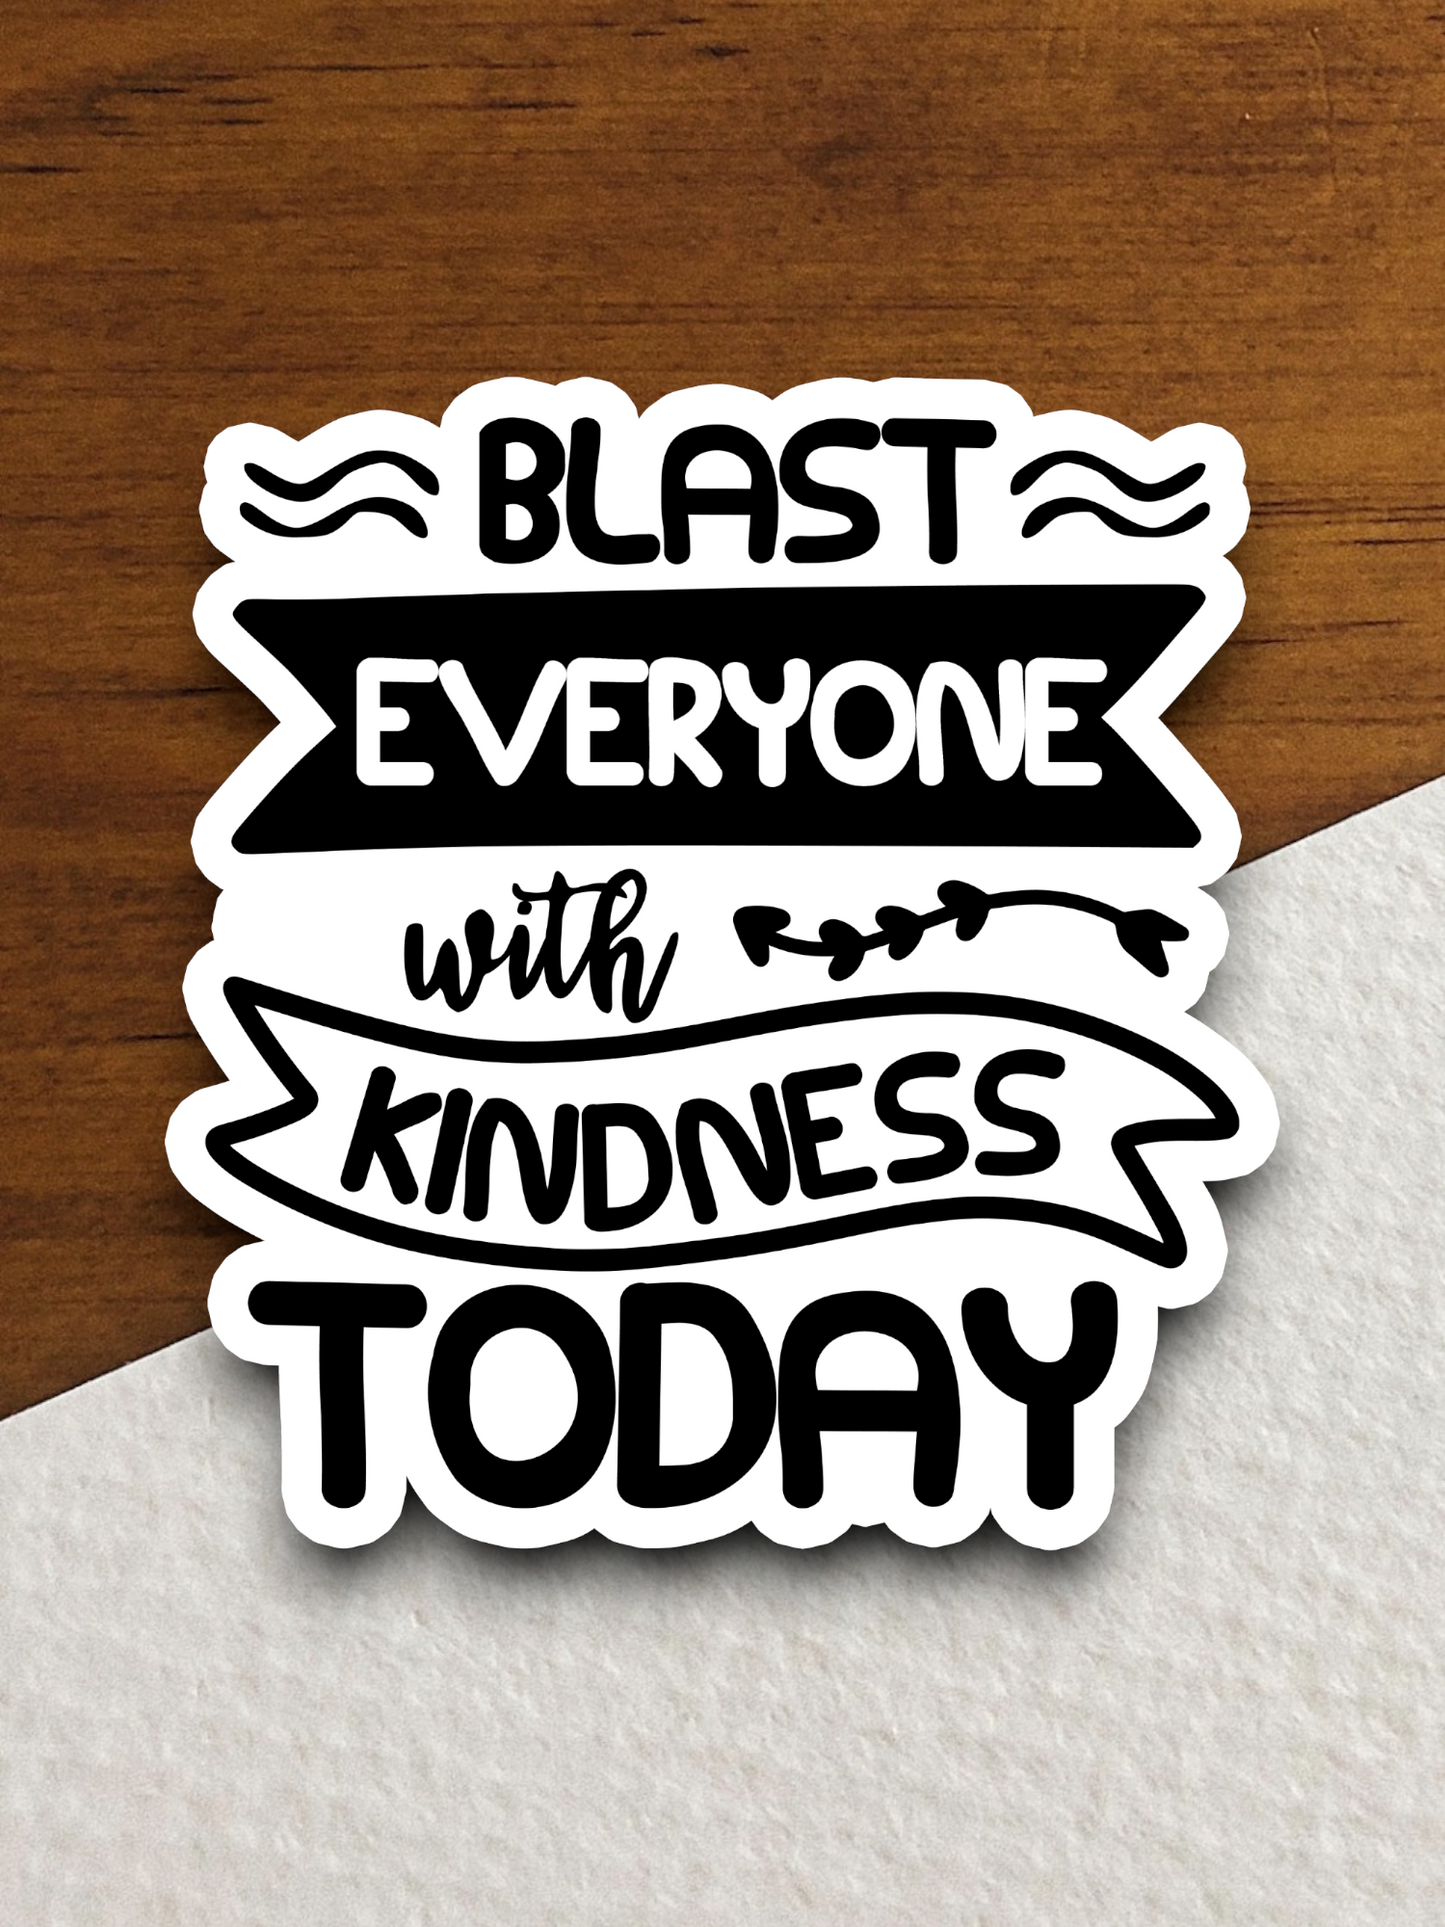 Blast Everyone with Kindness Today Sticker